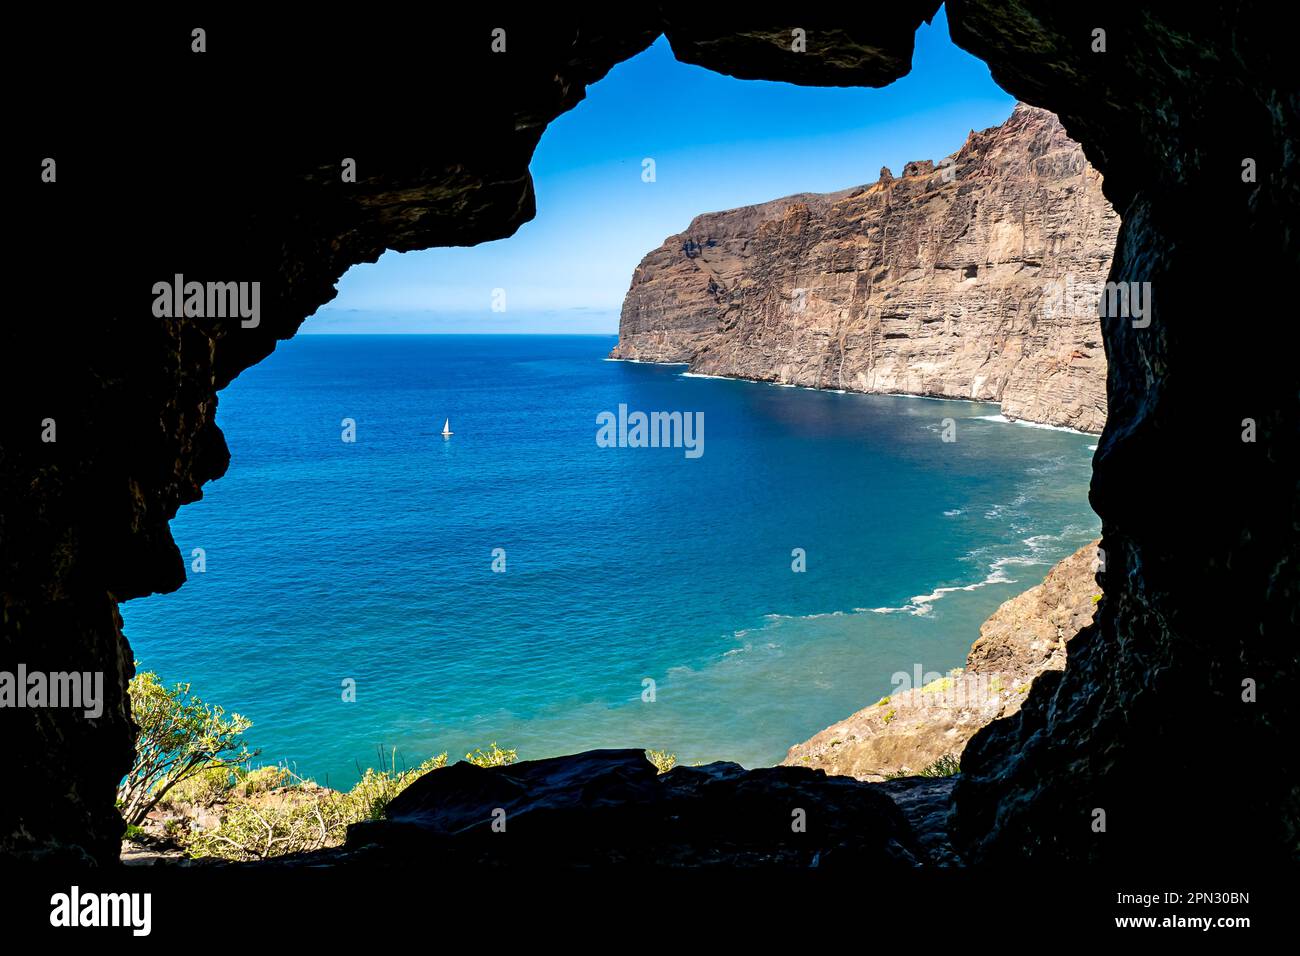 View upon waters of Los Gigantes Bay from the entrance of a small cave, with the imposing Acantilados de Los Gigantes cliffs towering above the sea. Stock Photo